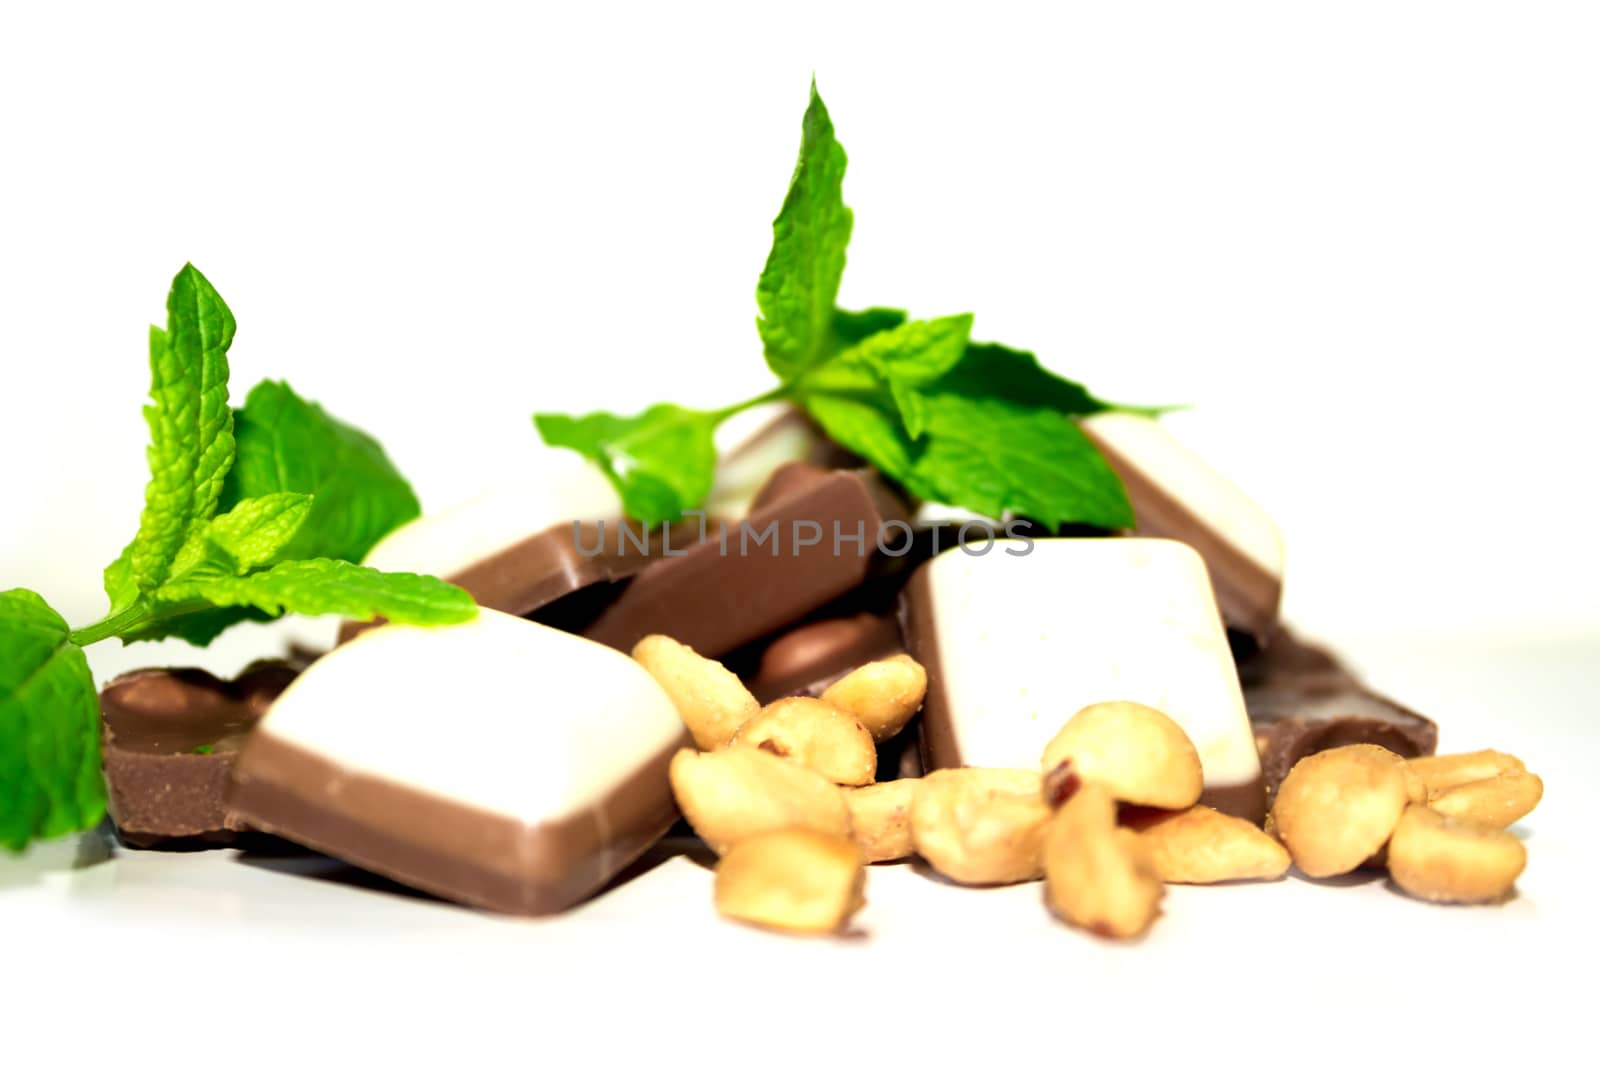 Chocolate, mint and peanuts by Madrolly